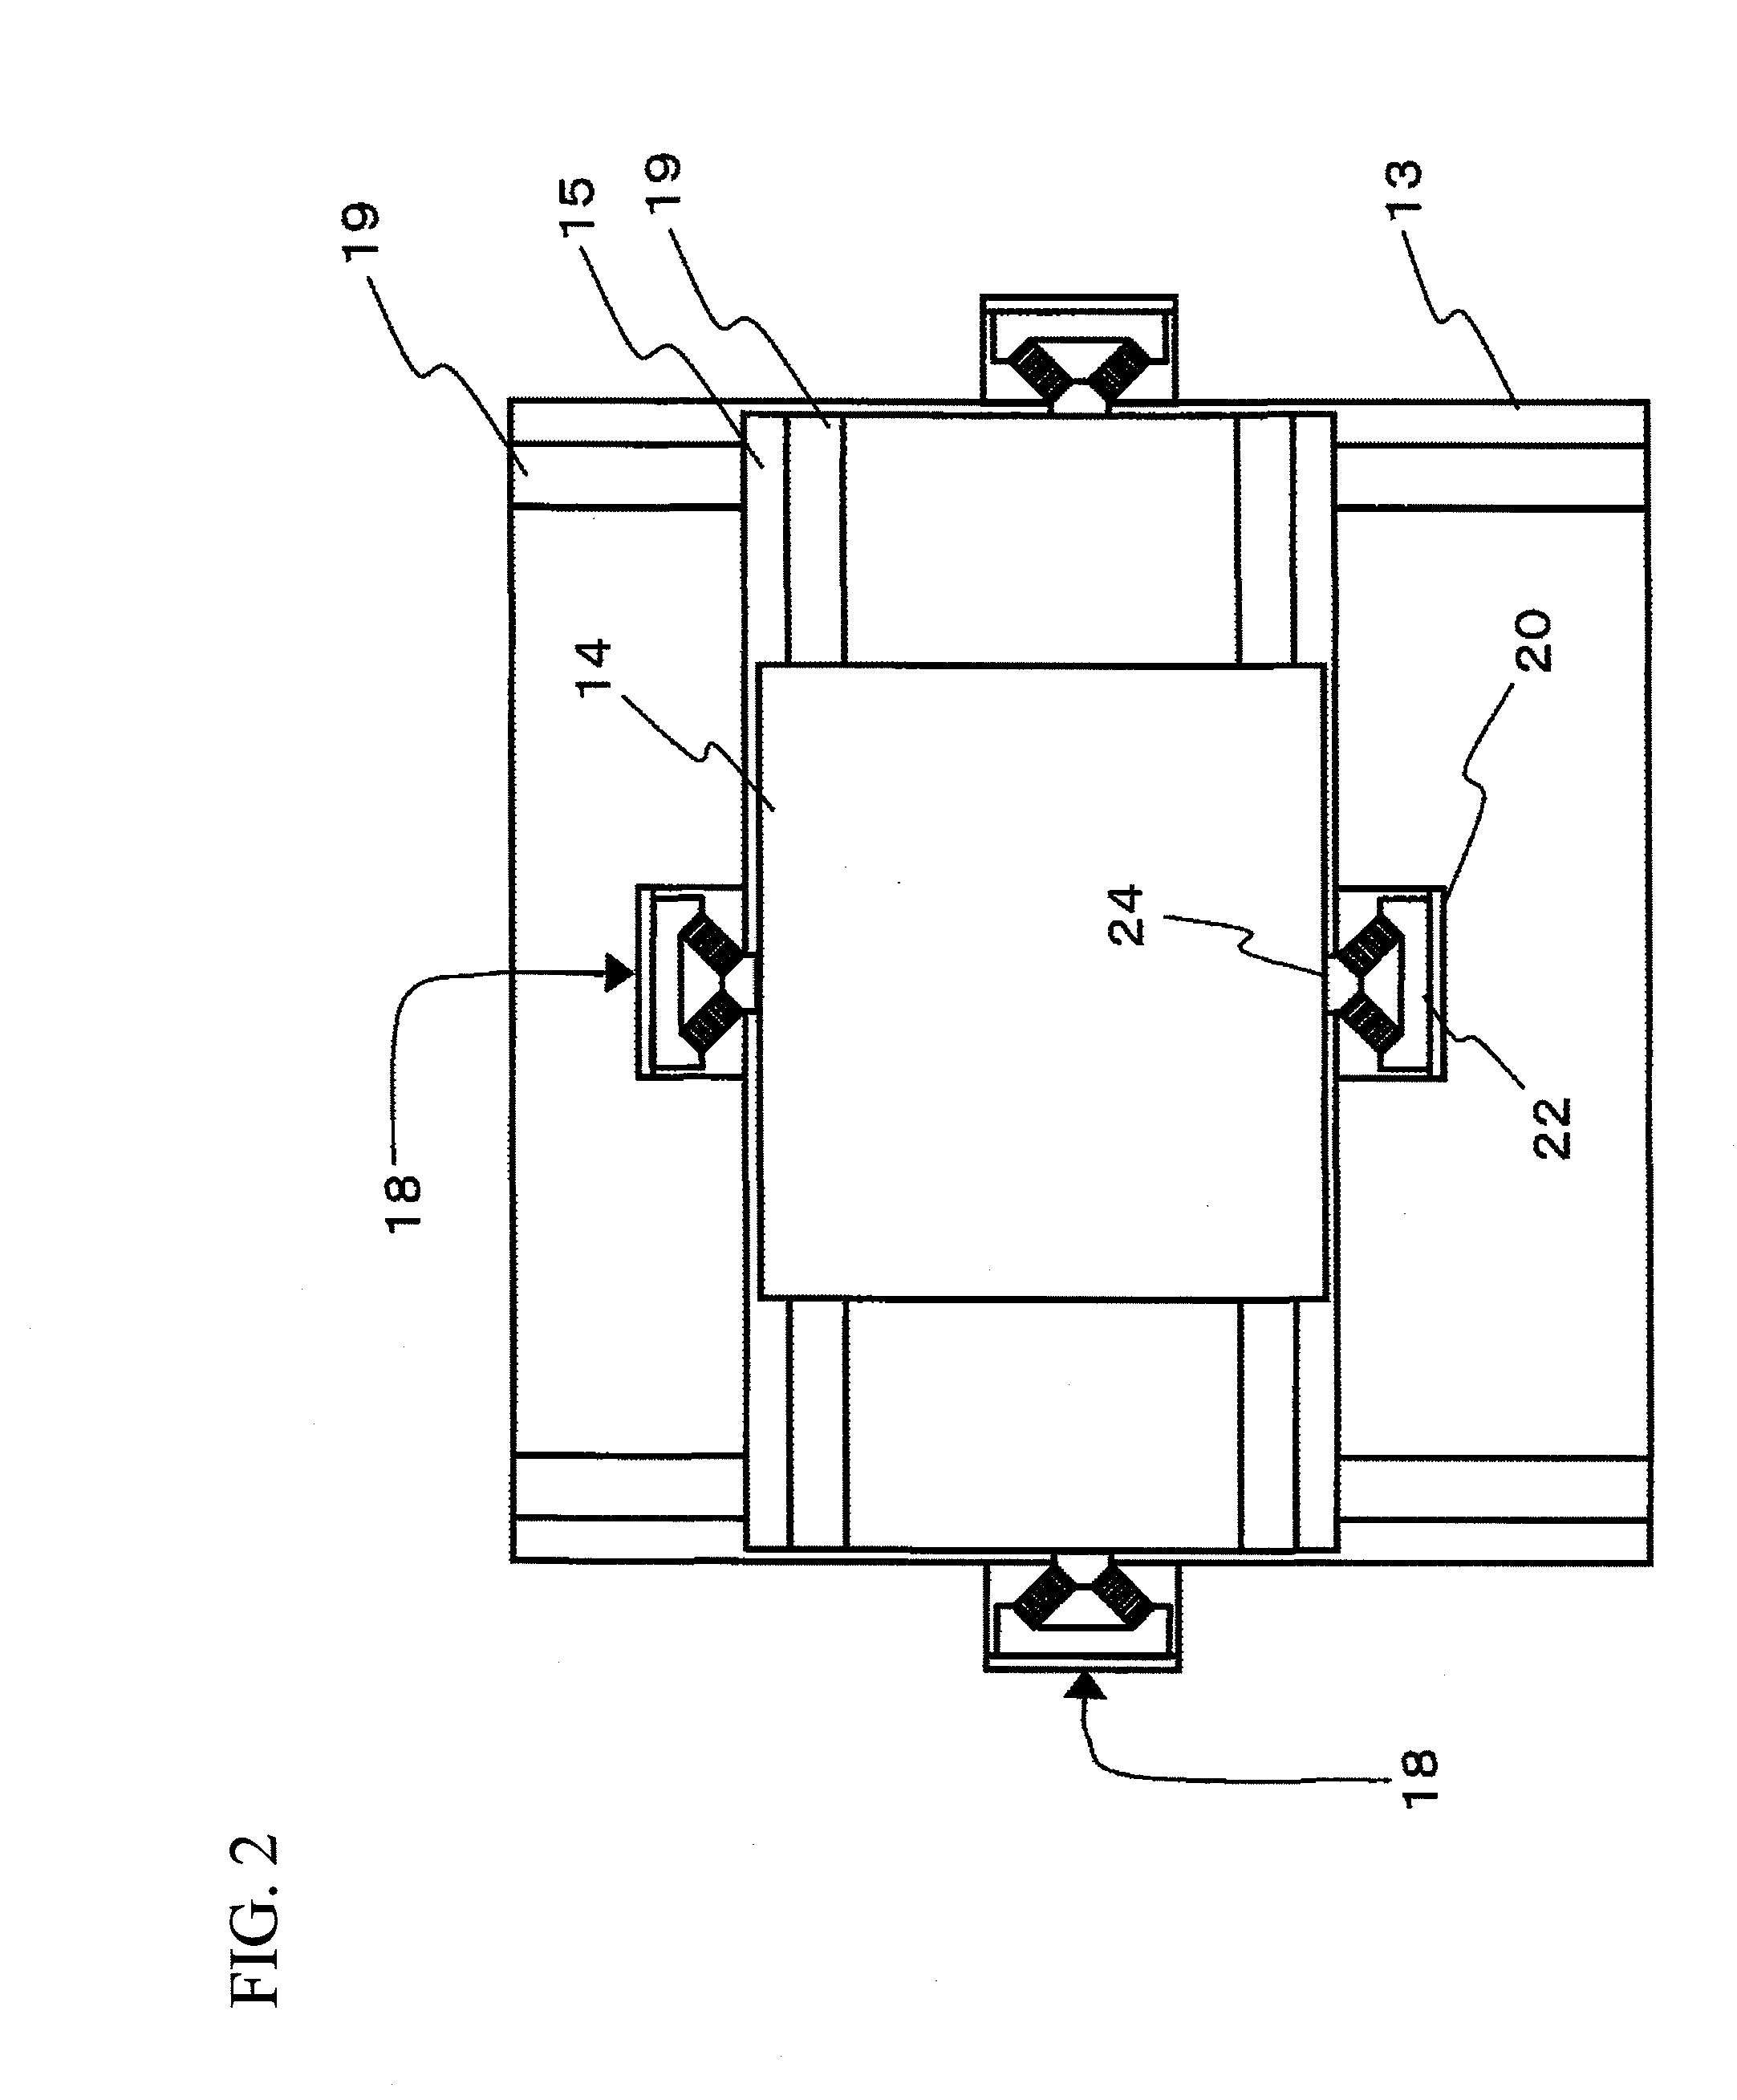 Stage and electron microscope apparatus